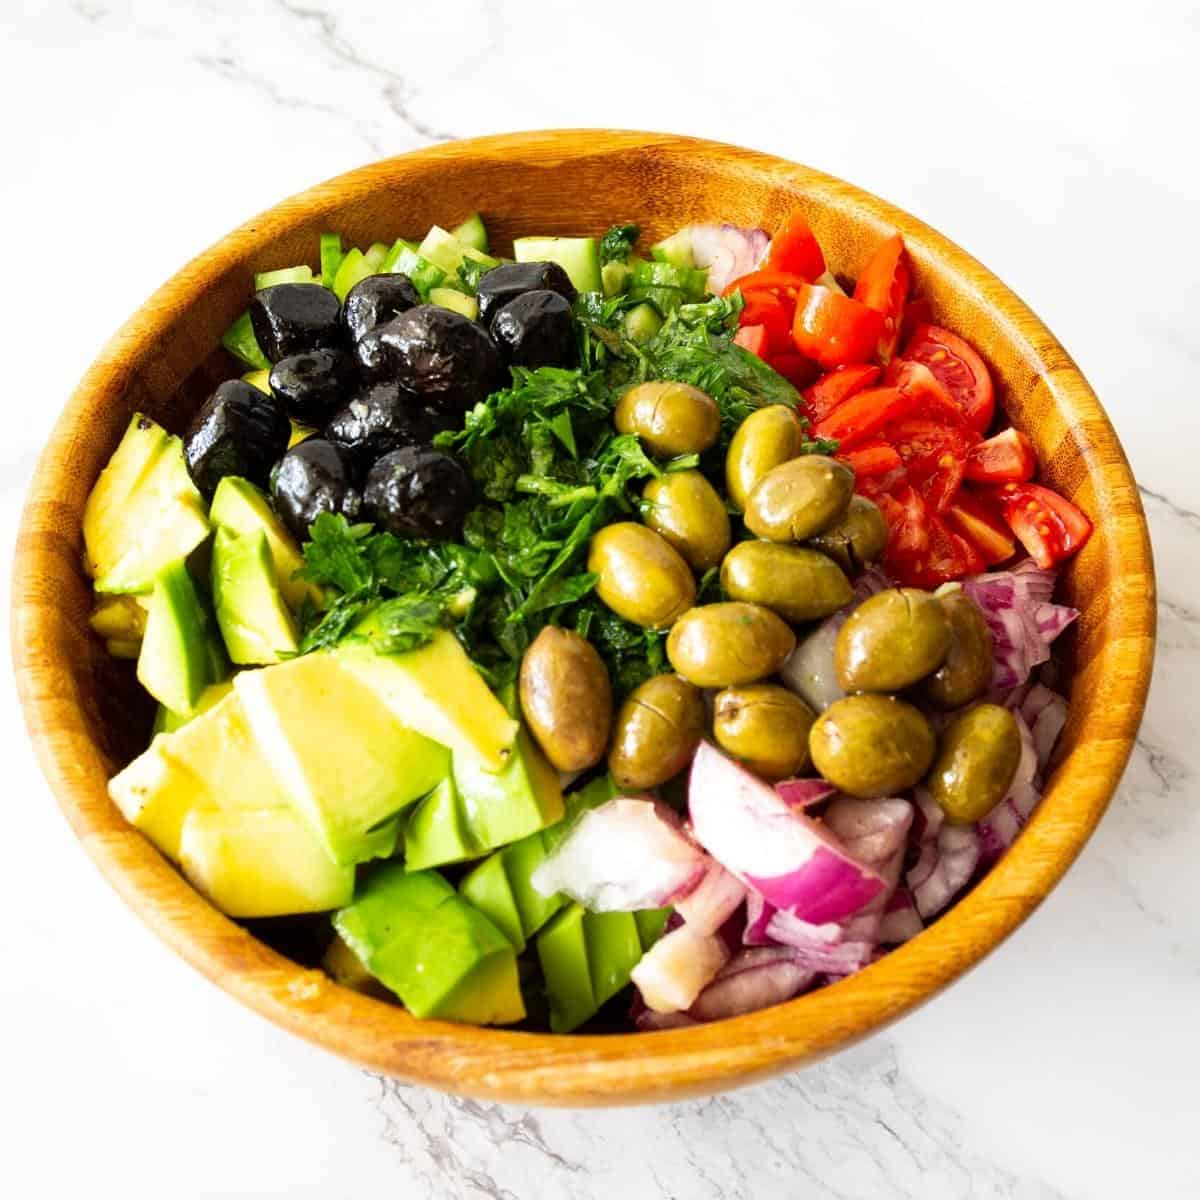 Salad with avocado, olives, cucumber, tomatoes.